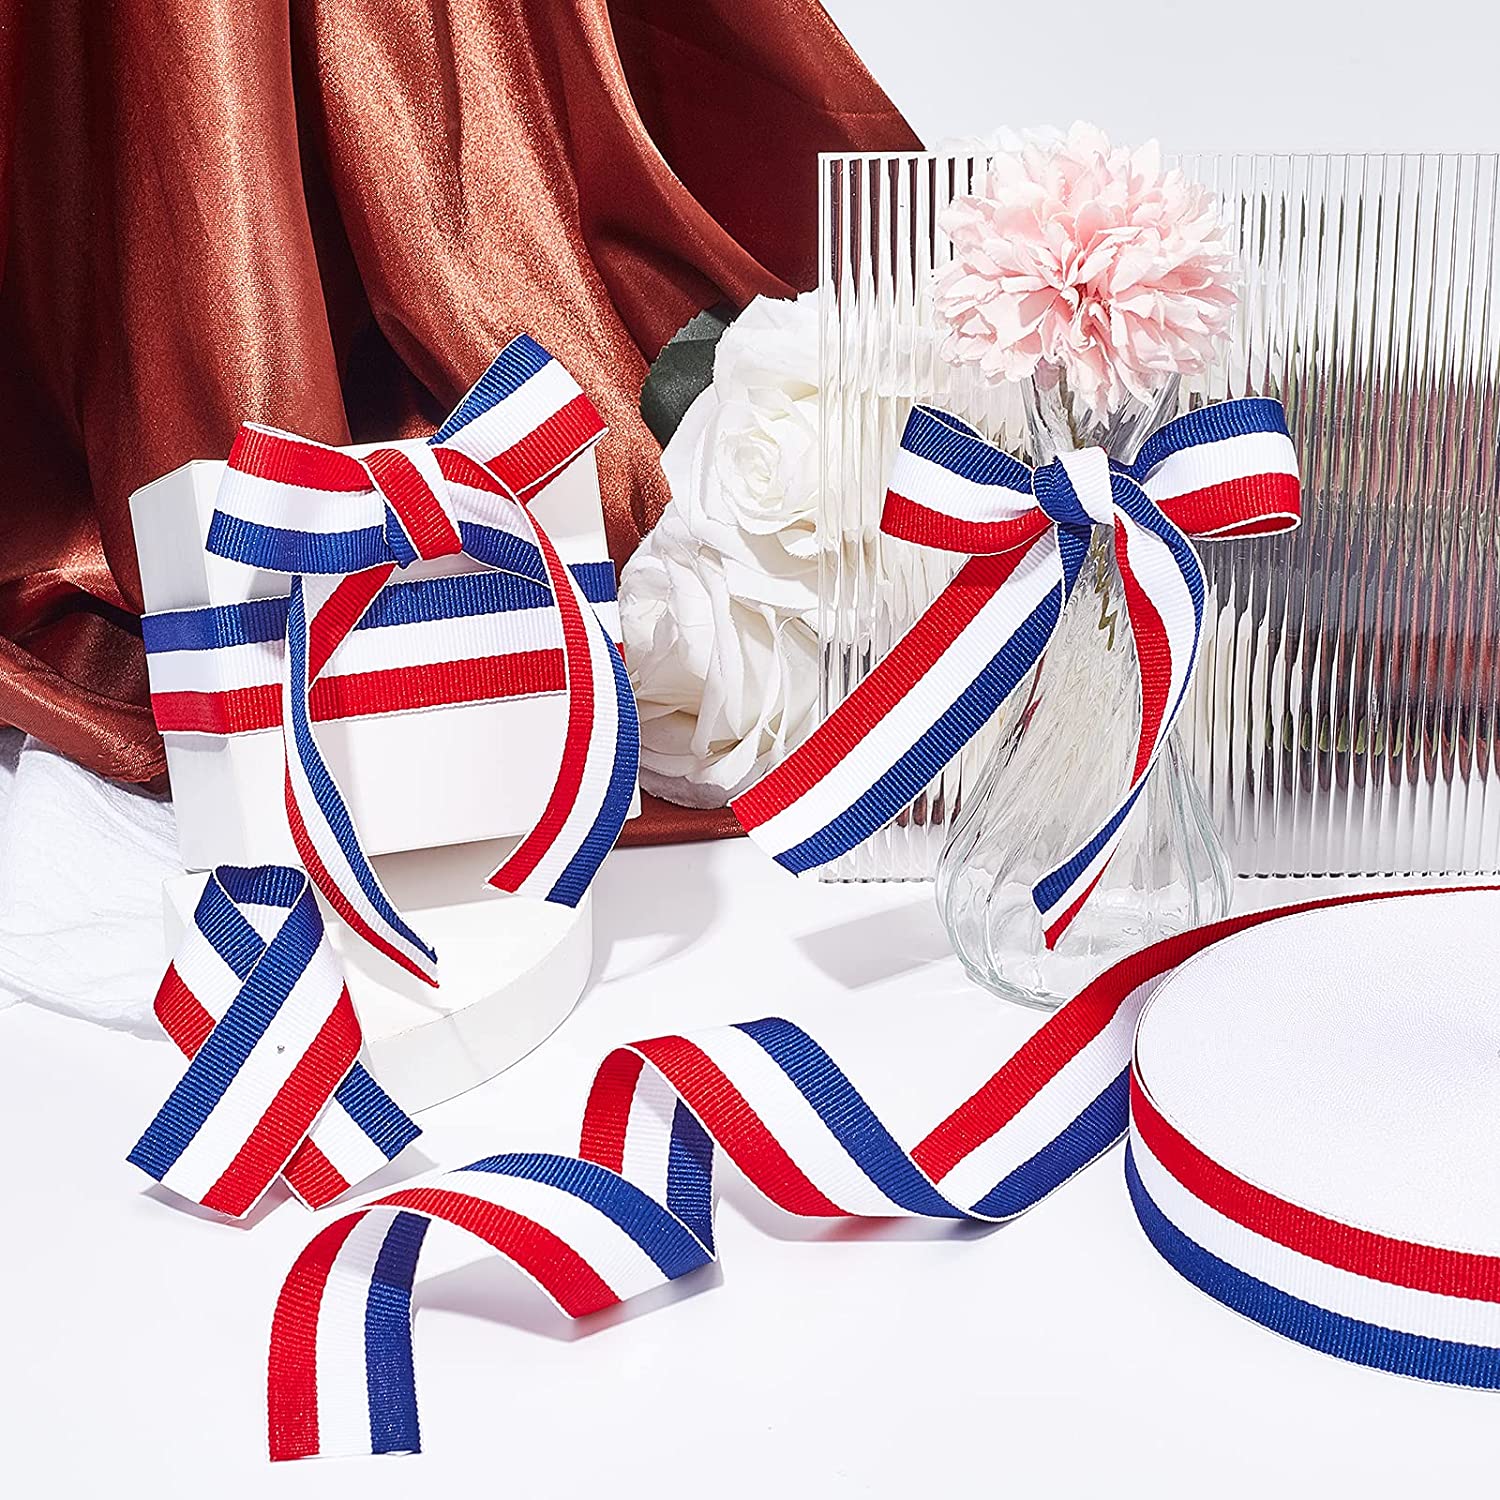 1.1 Inch American Fag Ribbon, Red White Blue Striped Grosgrain Ribbon Patriotic Craft Ribbon for Christmas Holiday New Year Party Decoration Gift Wrapping Crafting Sewing